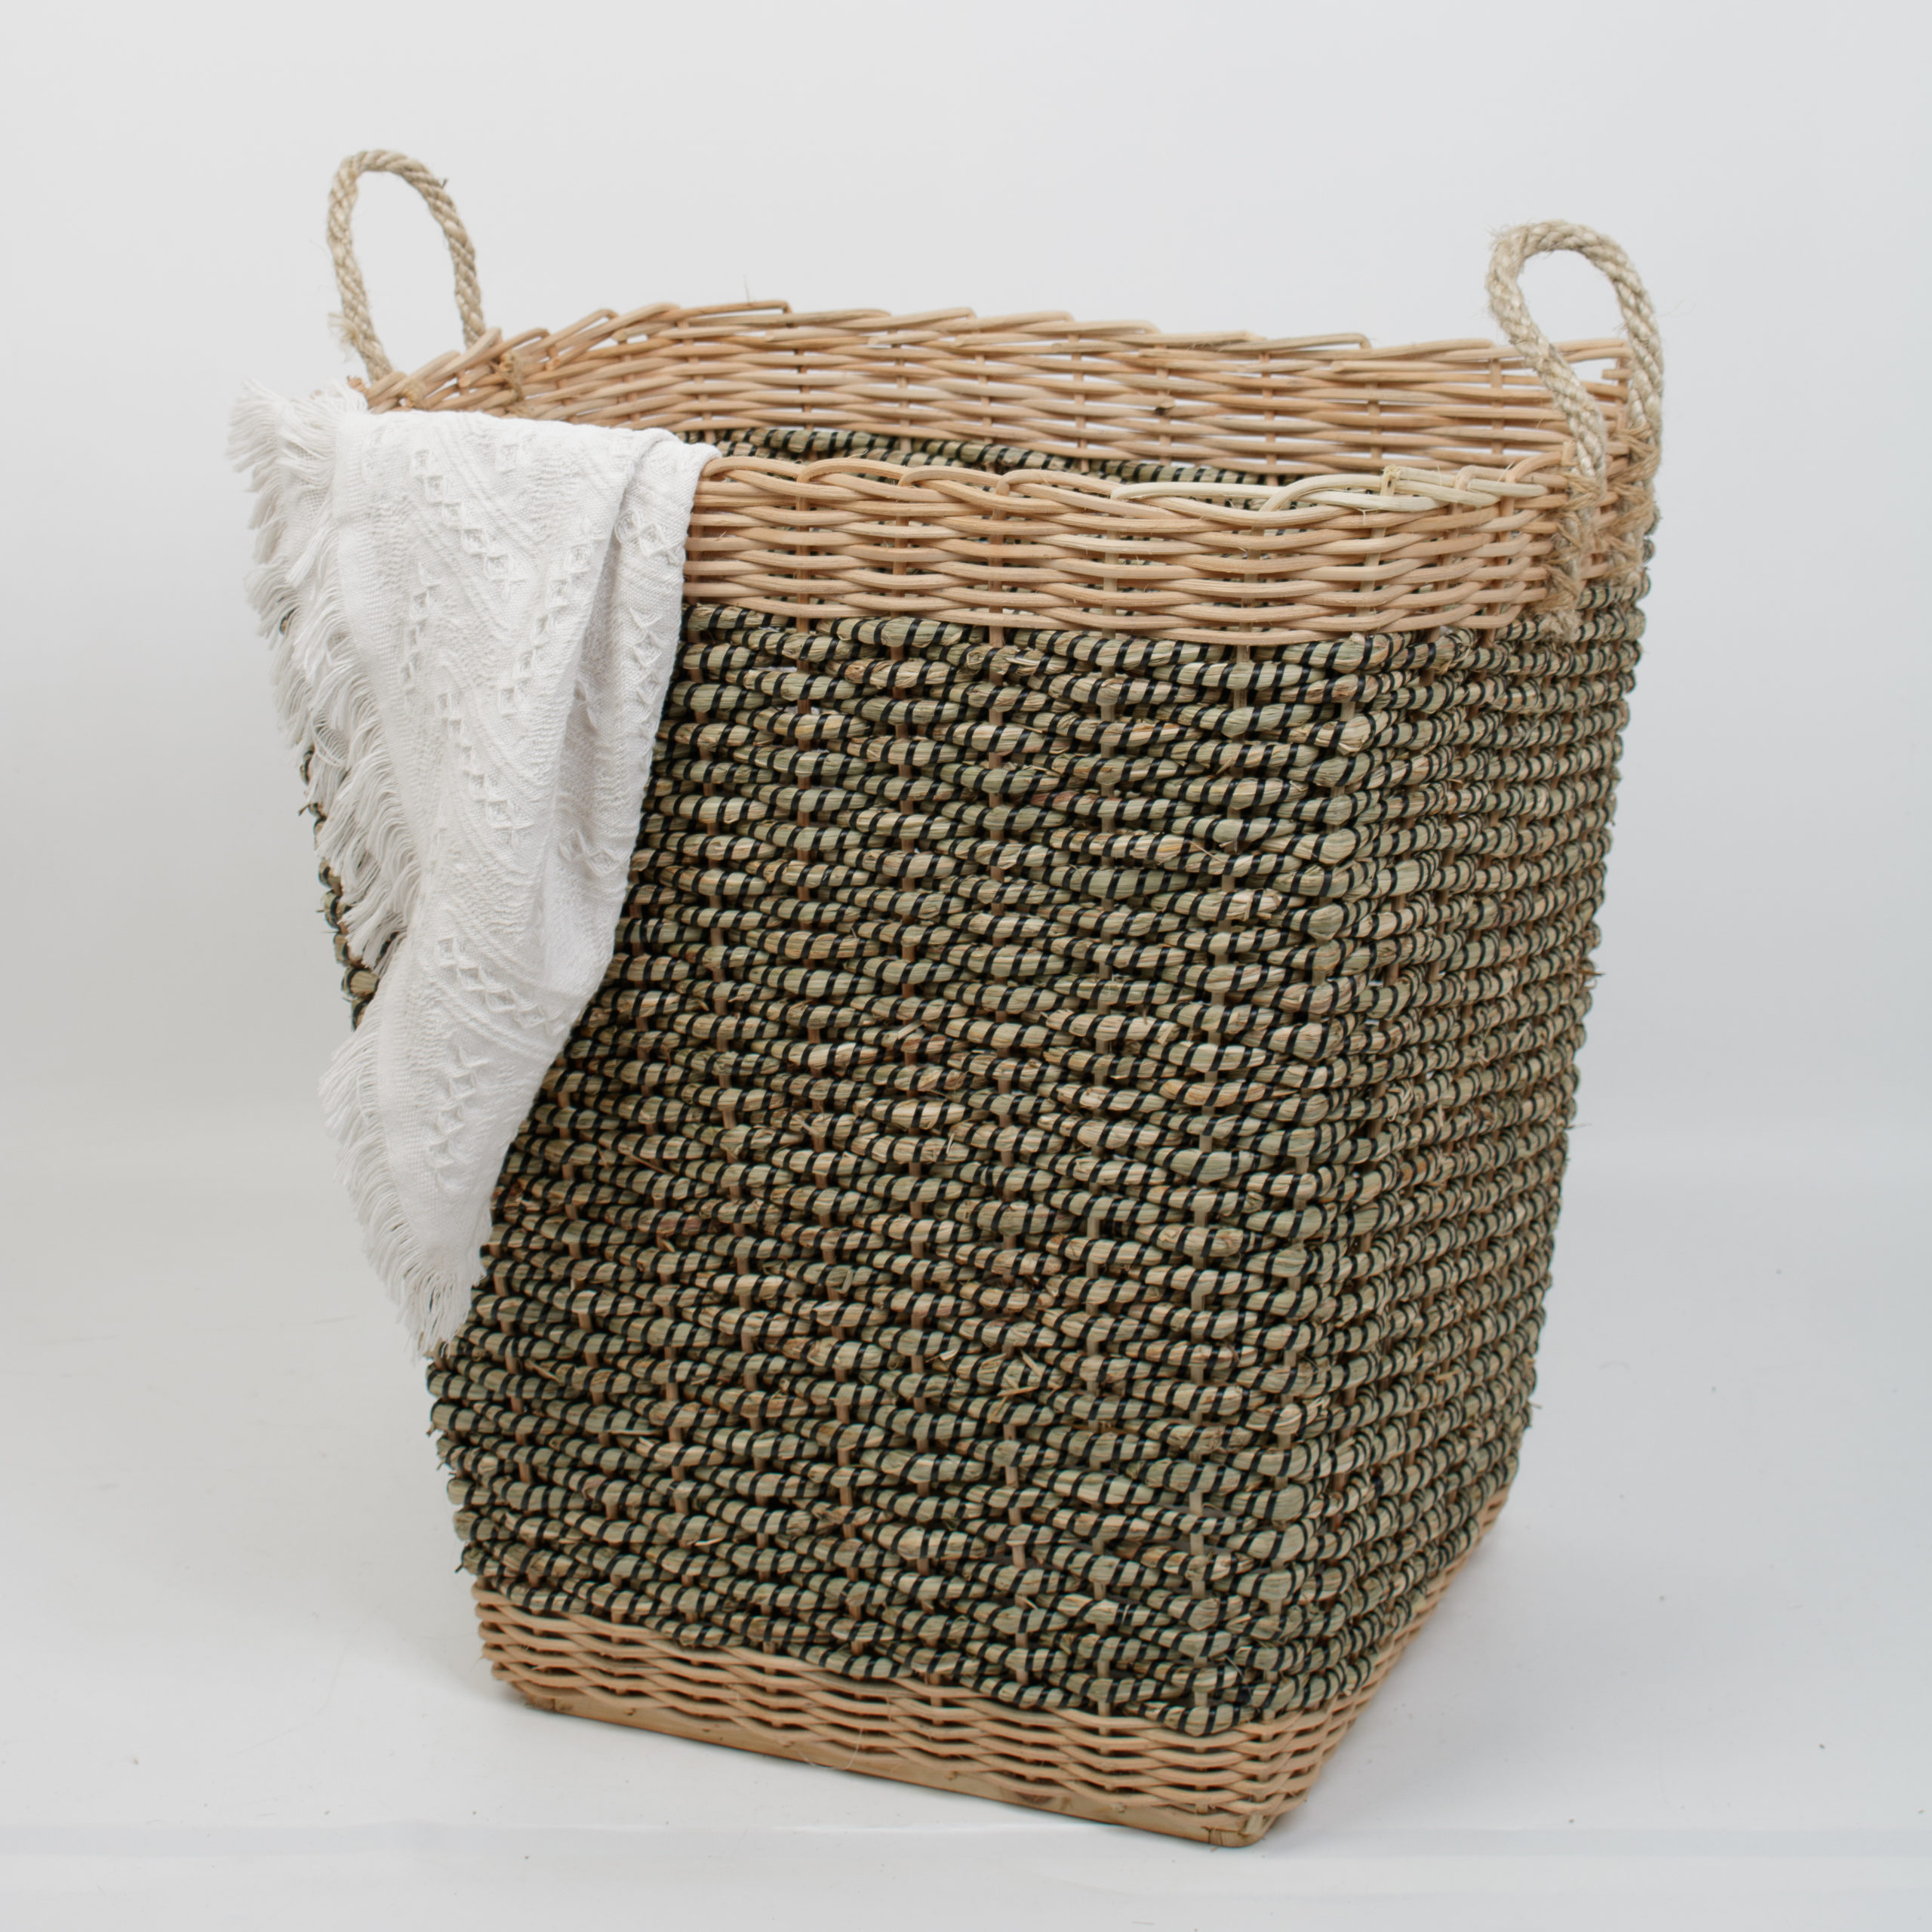 woven seagrass laundry basket with handles from only $14.58